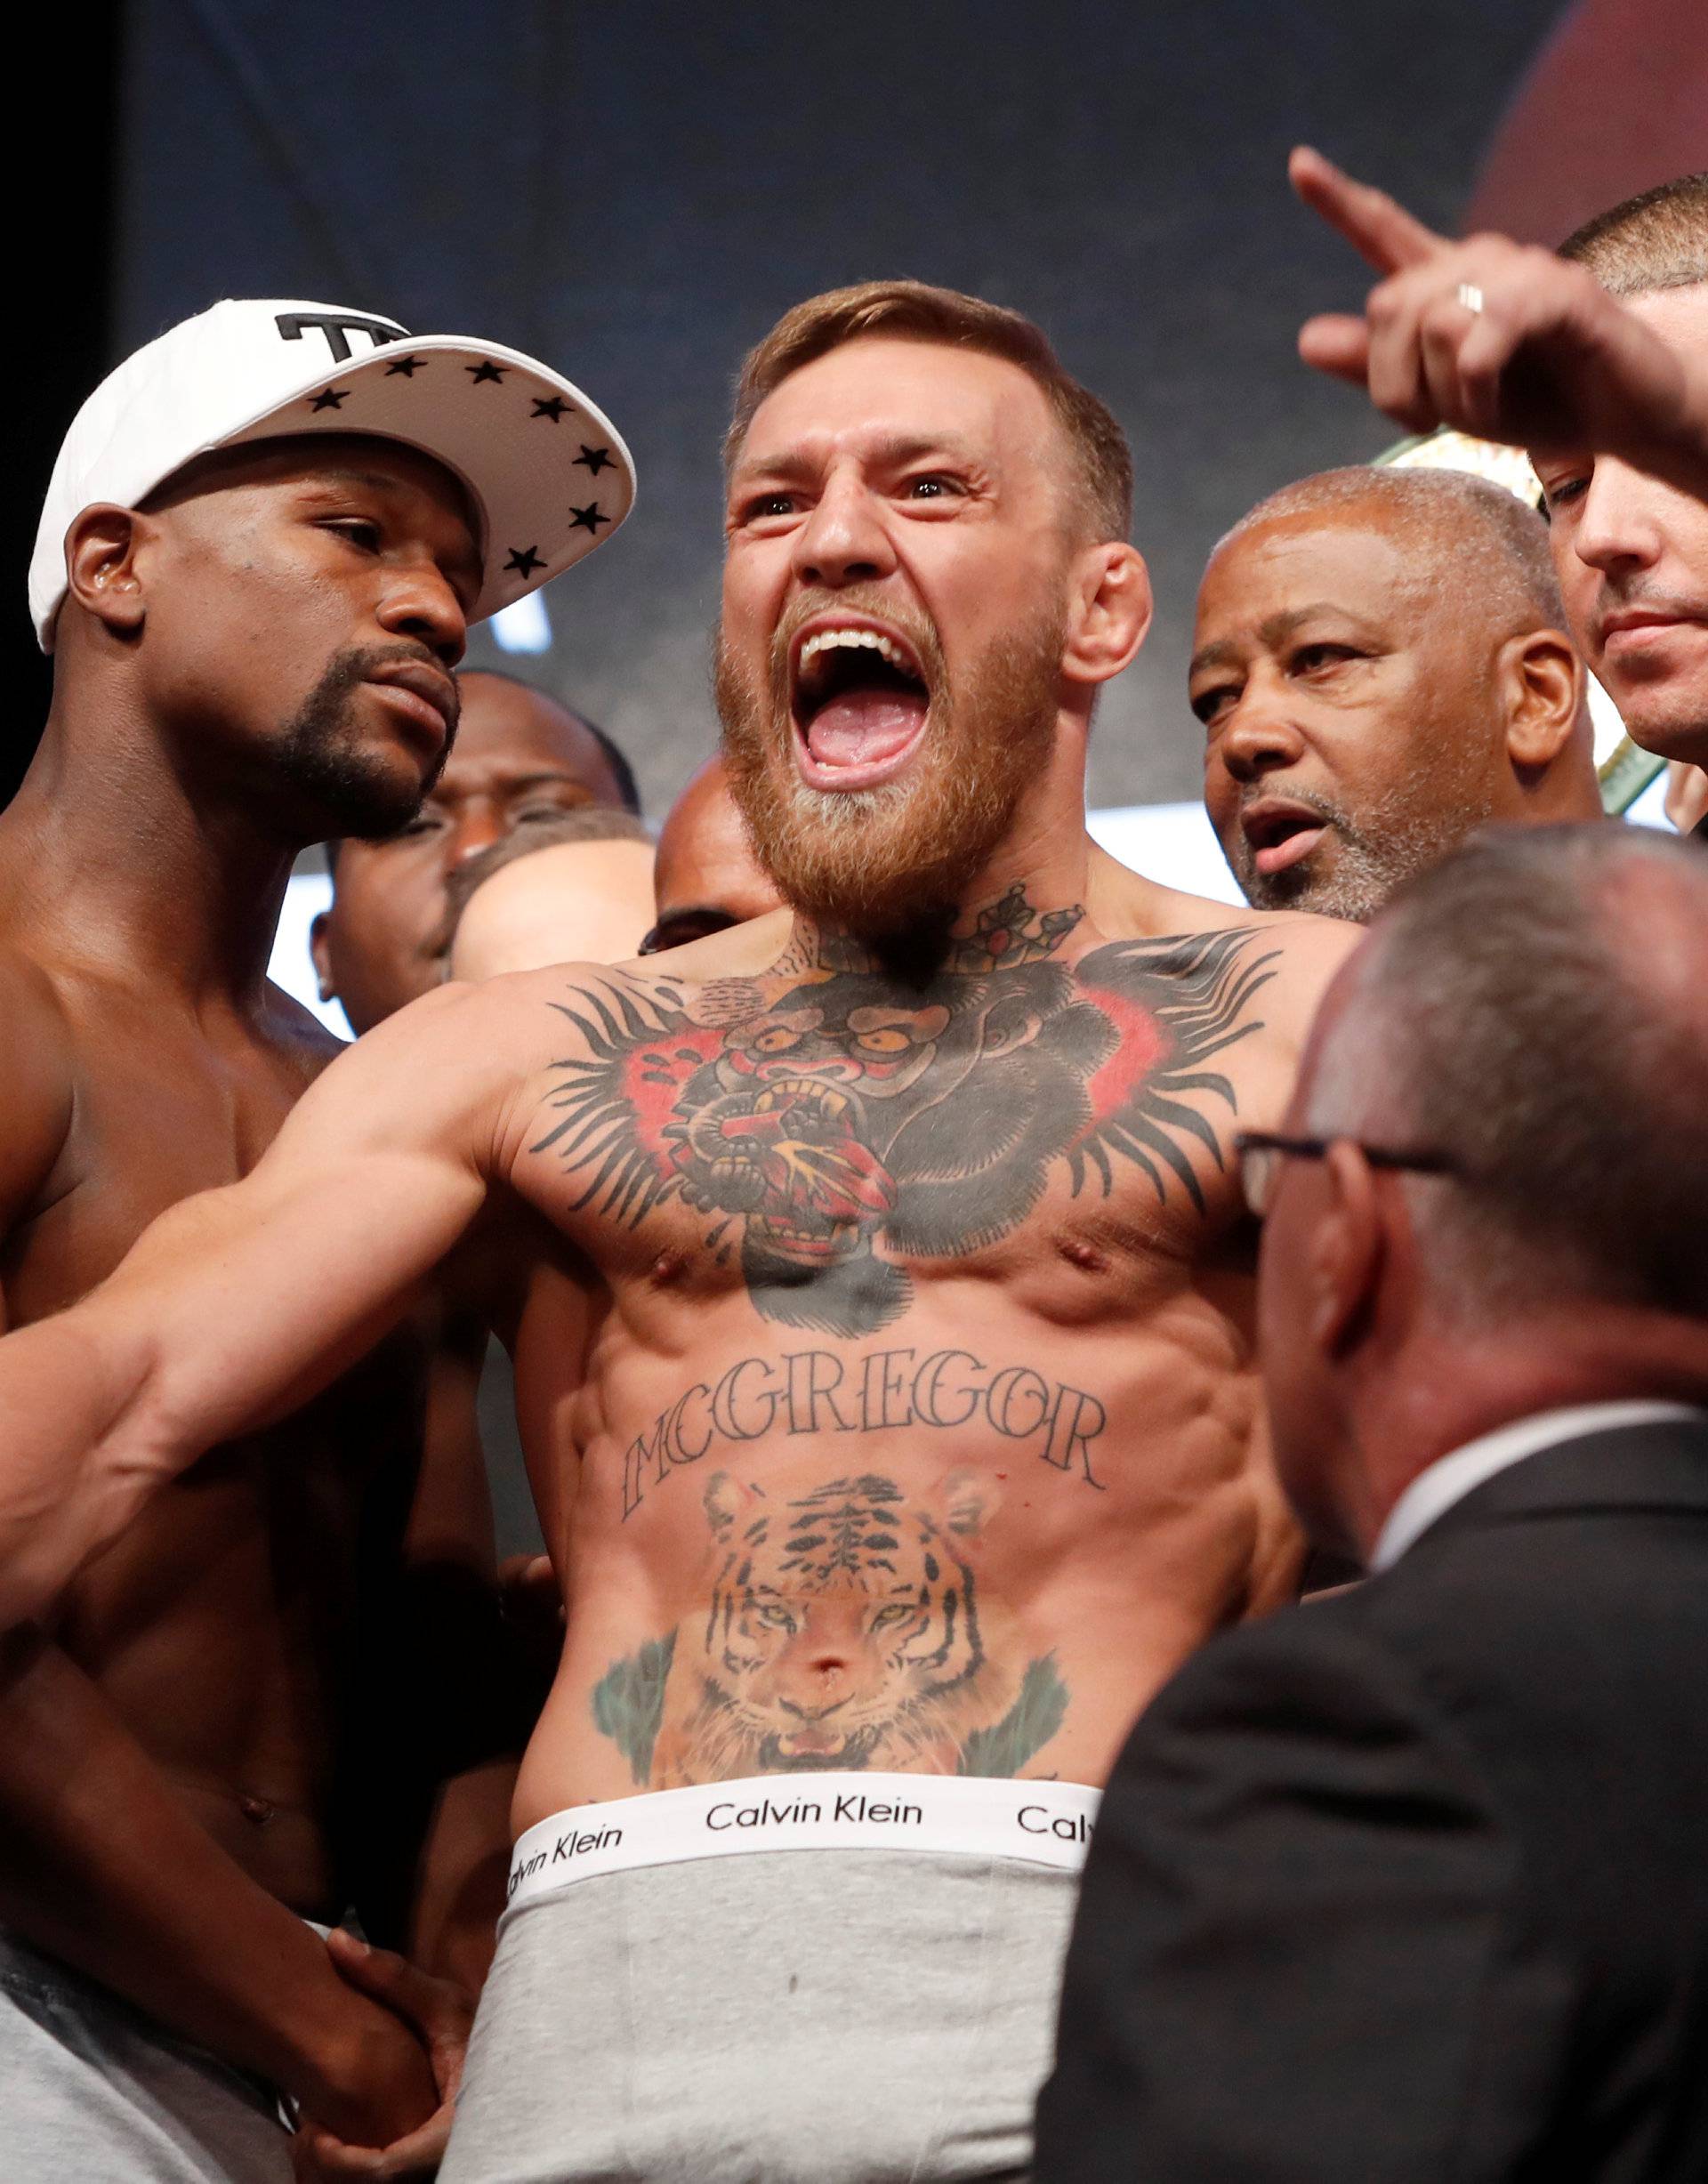 UFC lightweight champion Conor McGregor (C) of Ireland calls out as he poses with undefeated boxer Floyd Mayweather Jr. (L) of the U.S. during their official weigh-in at T-Mobile Arena in Las Vegas